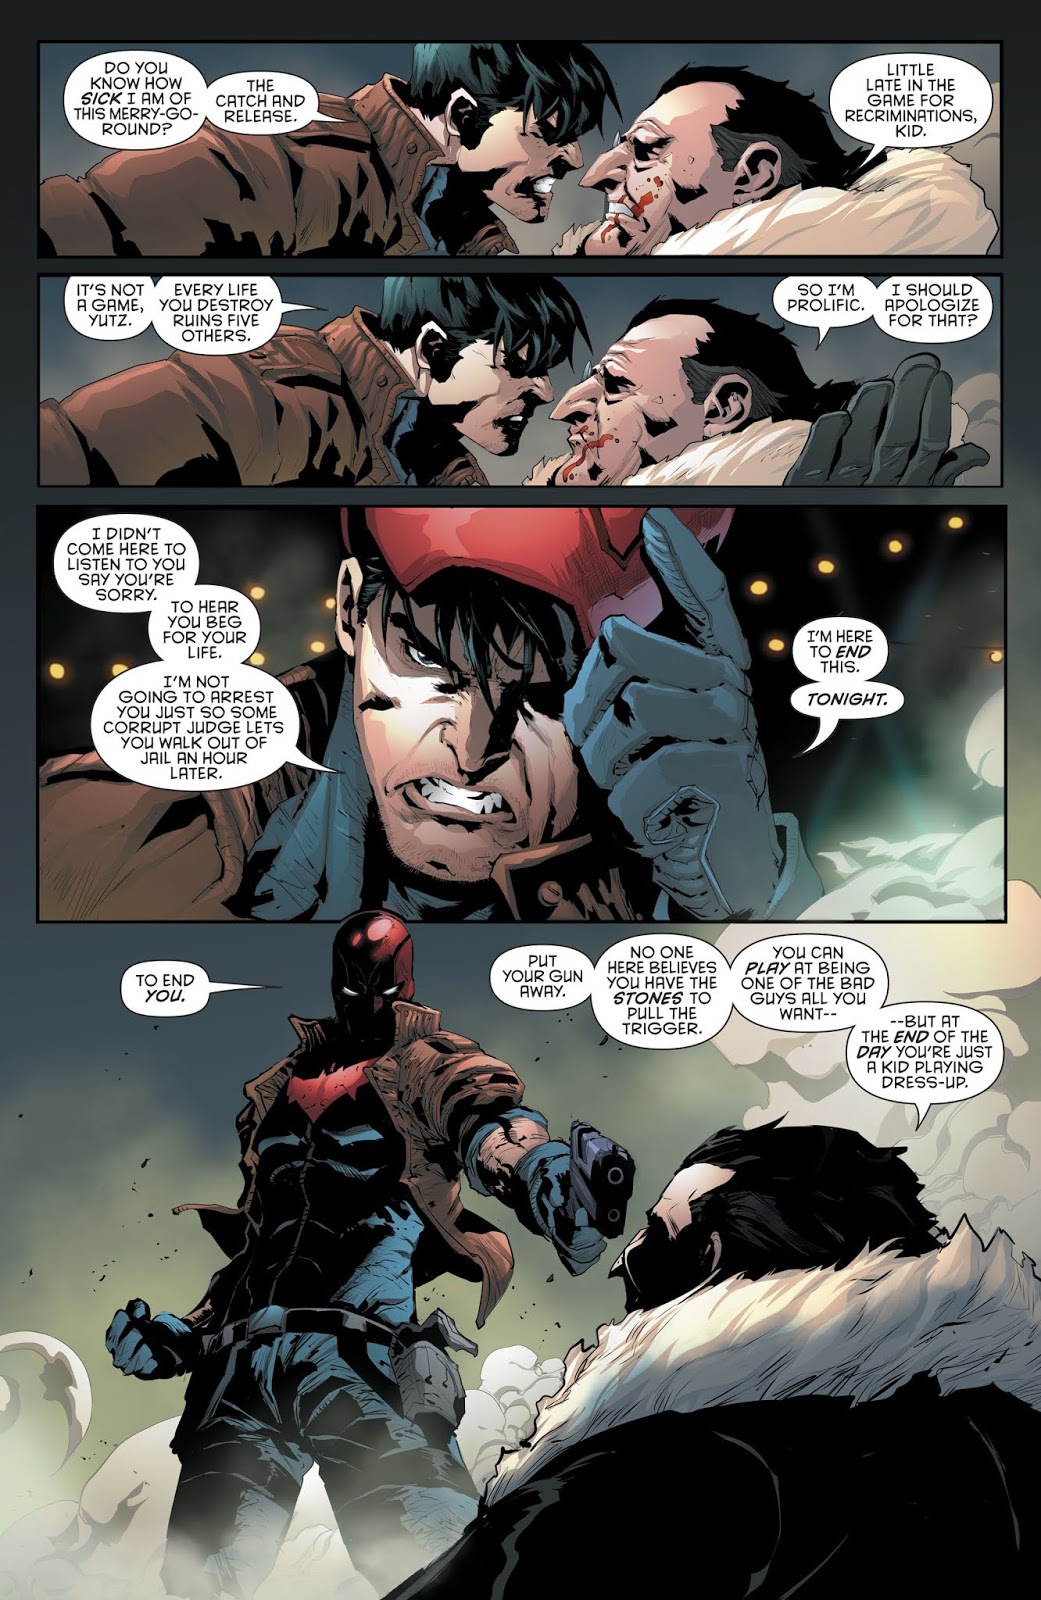 red hood and the outlaw #24 2